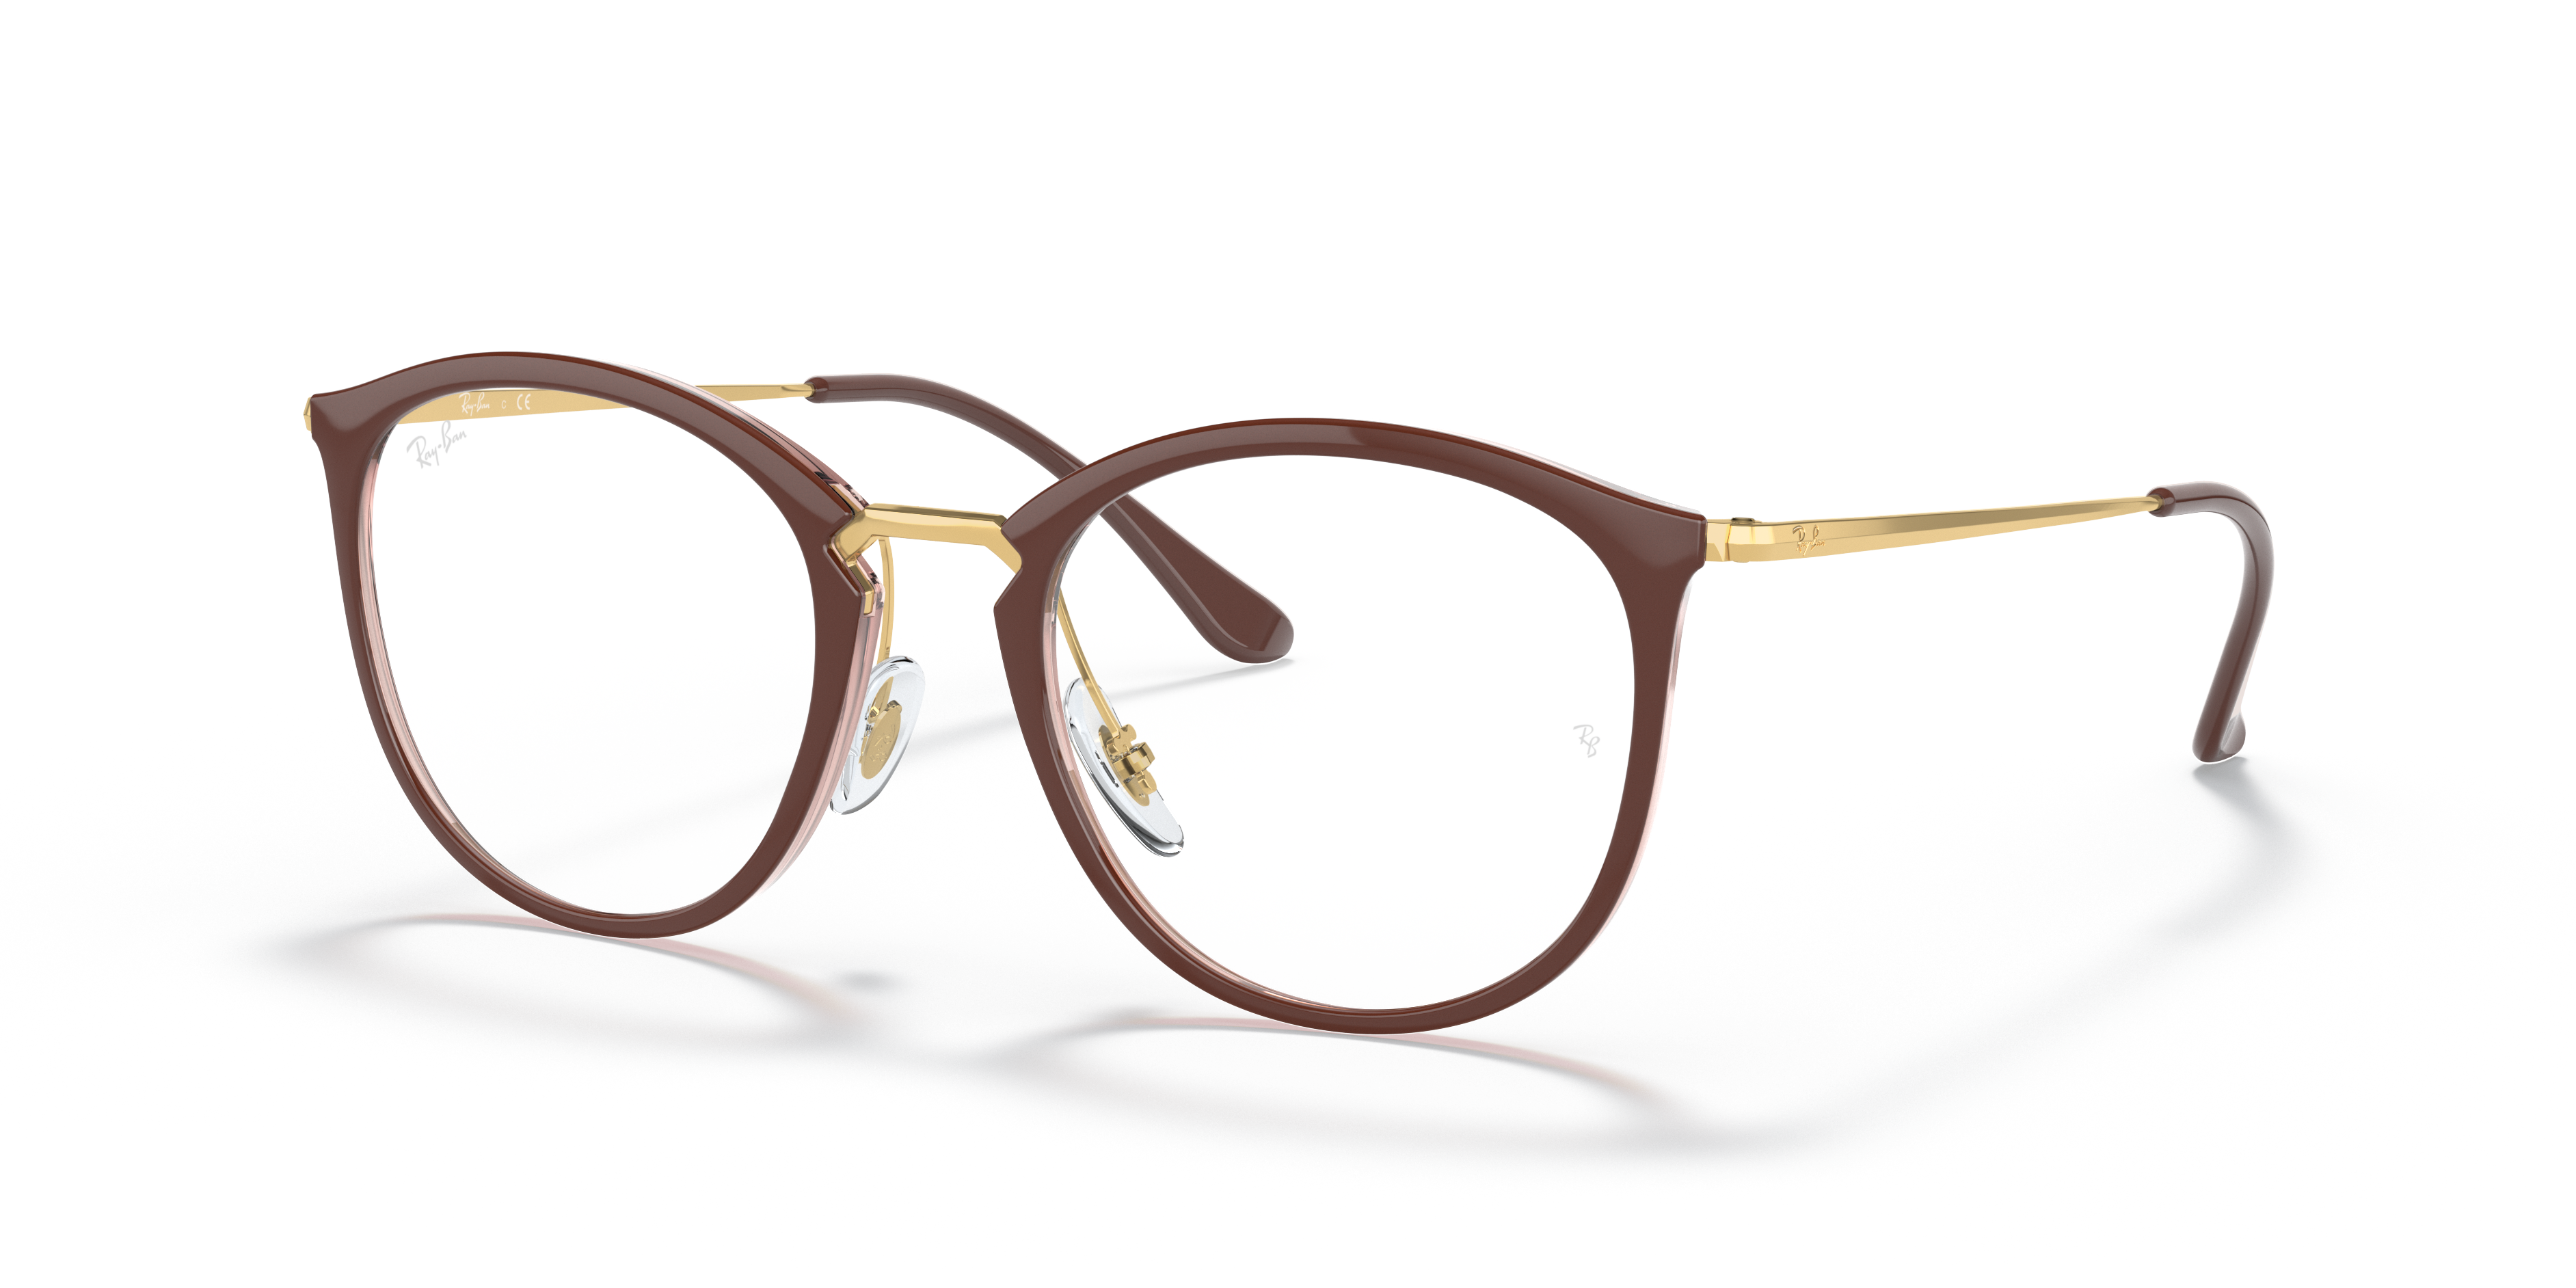 Rb7140 Eyeglasses with Brown Frame | Ray-Ban®